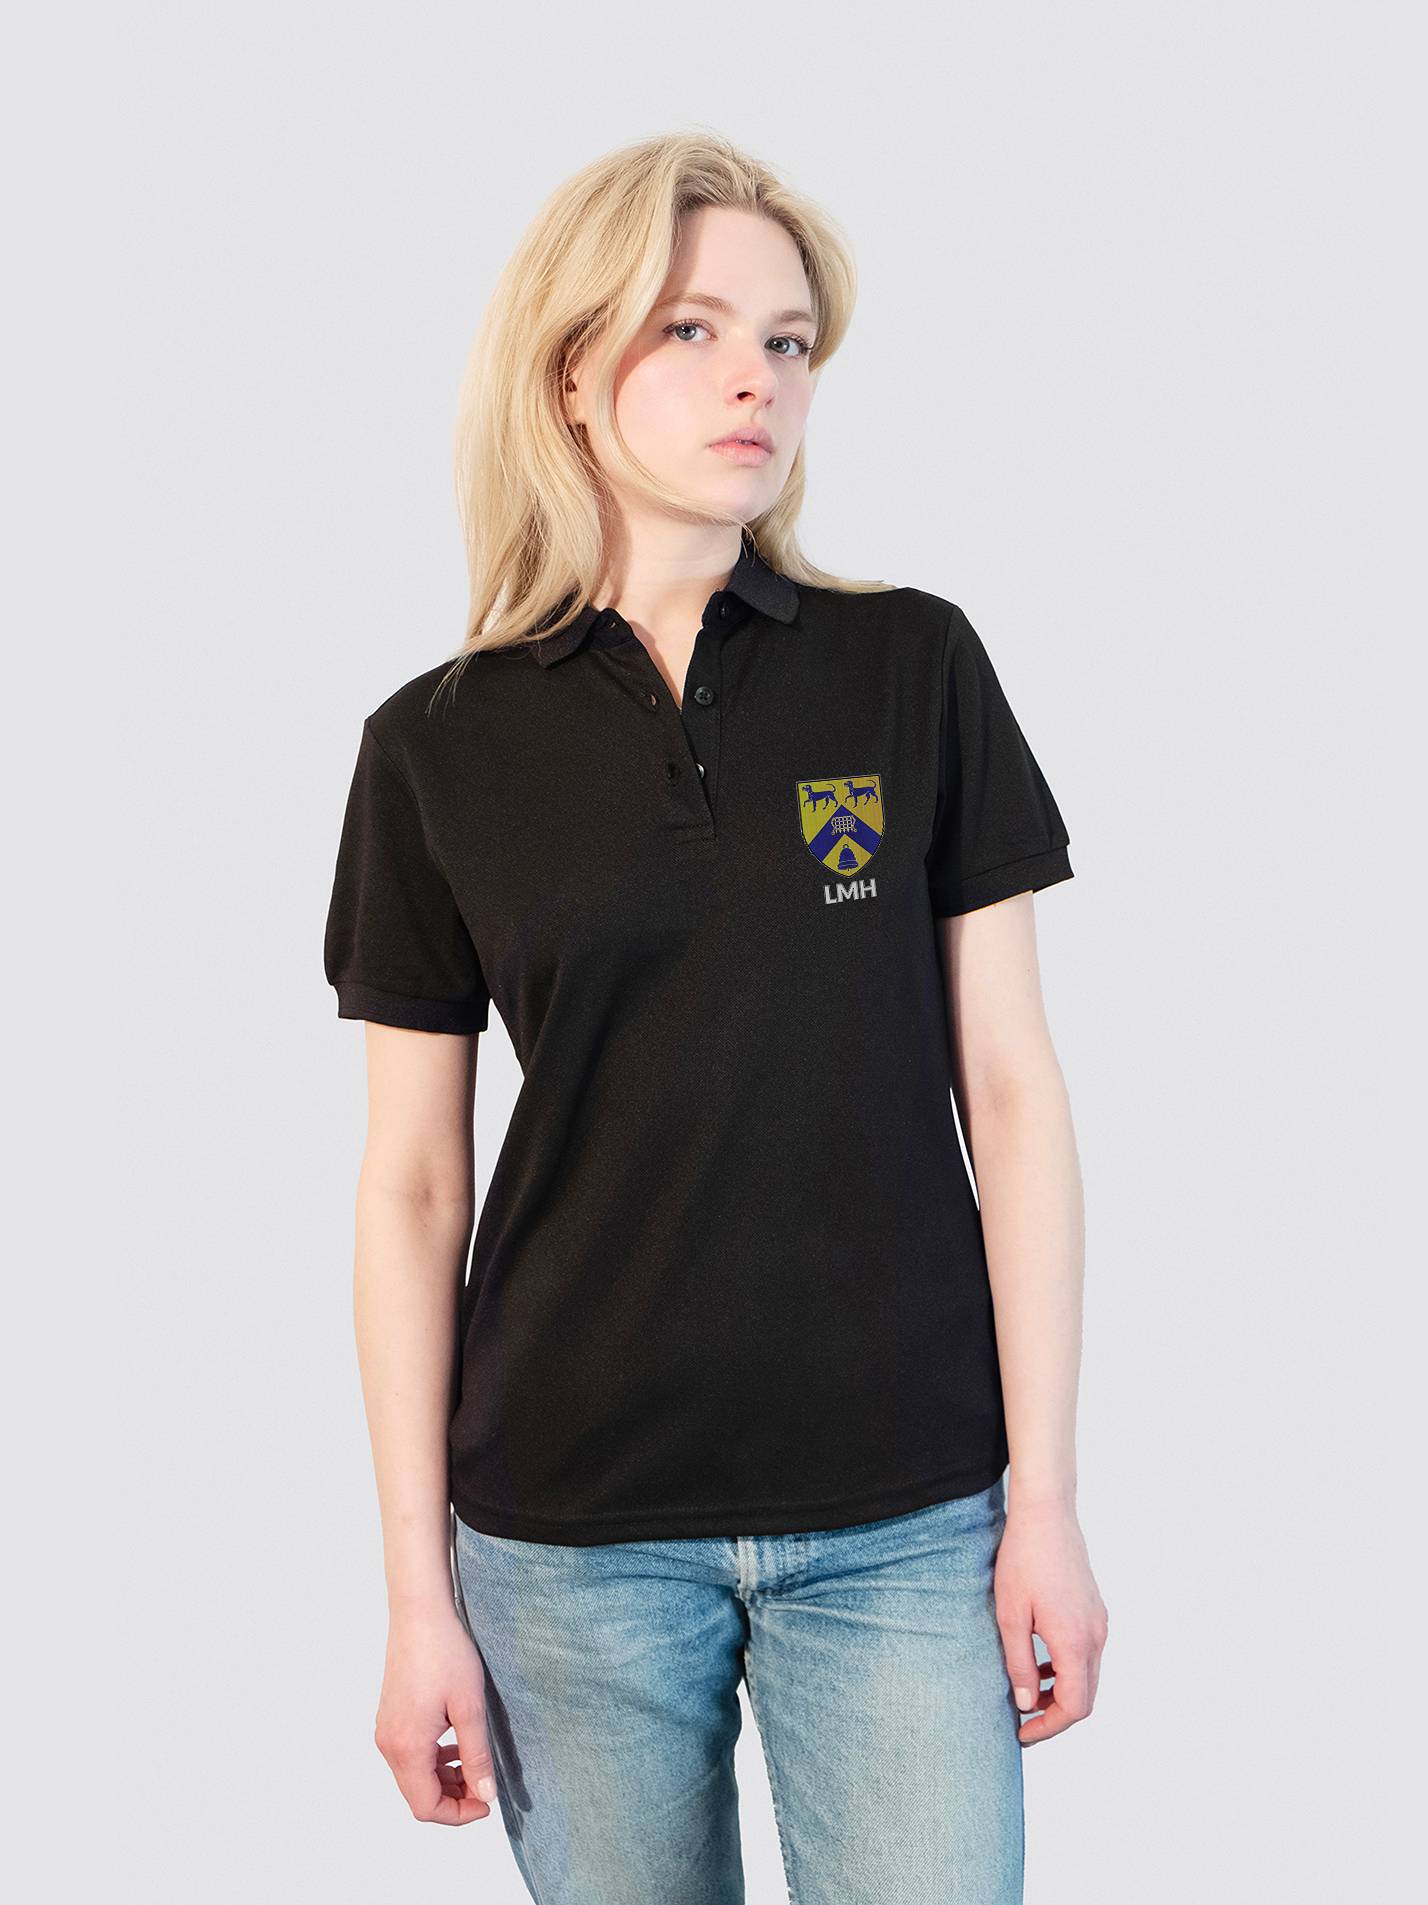 Lady Margaret Hall Oxford Sustainable Ladies Polo Shirt